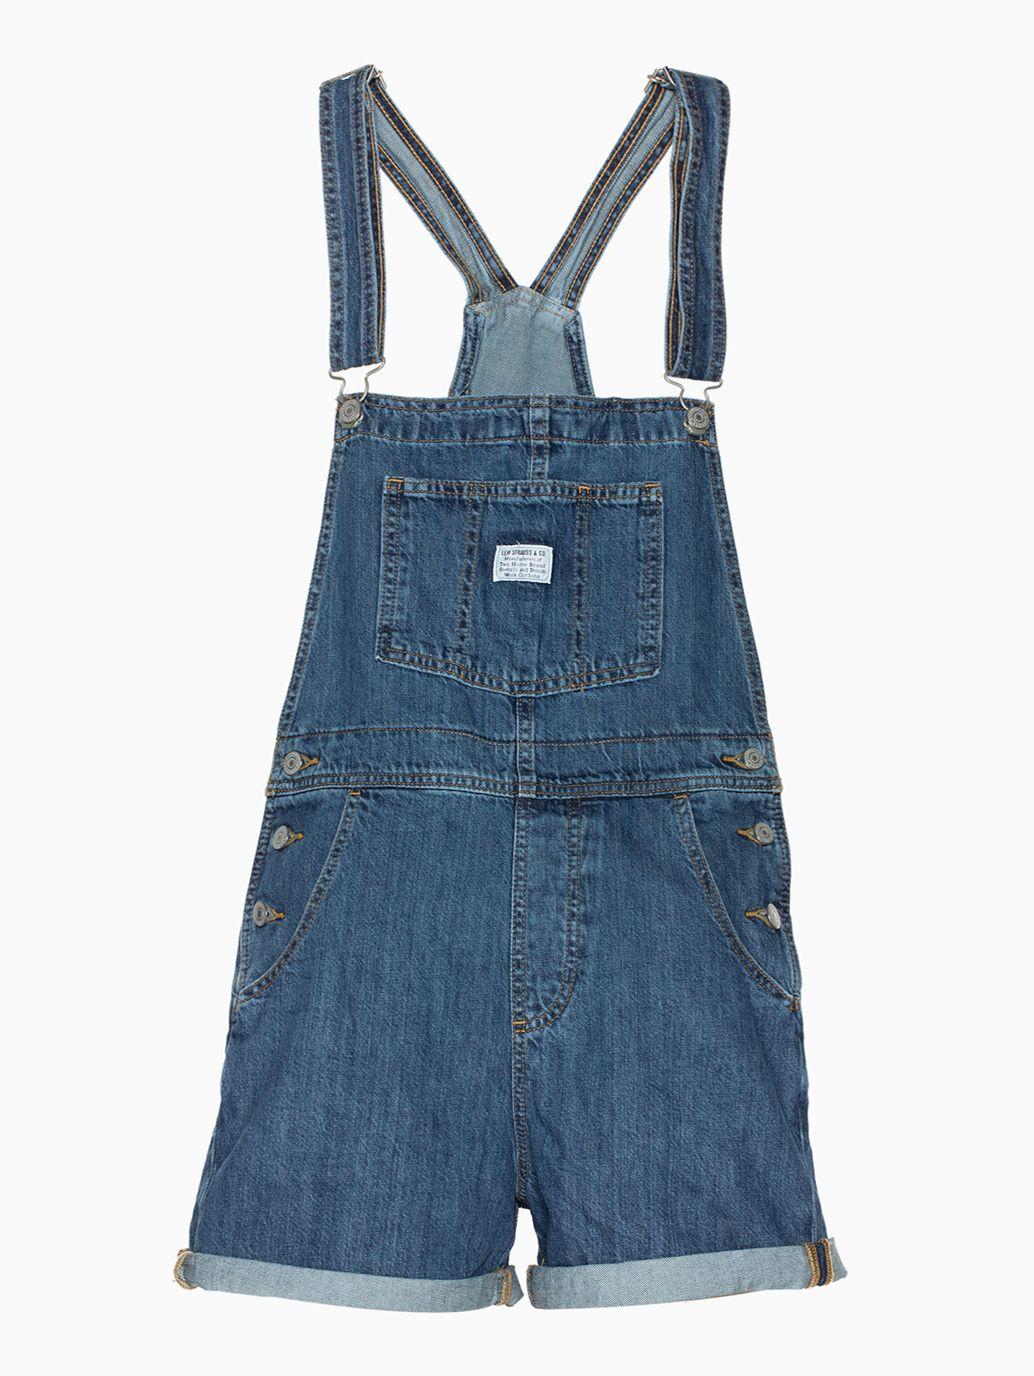 levis malaysia Vintage Shortall 523330003 14 Details